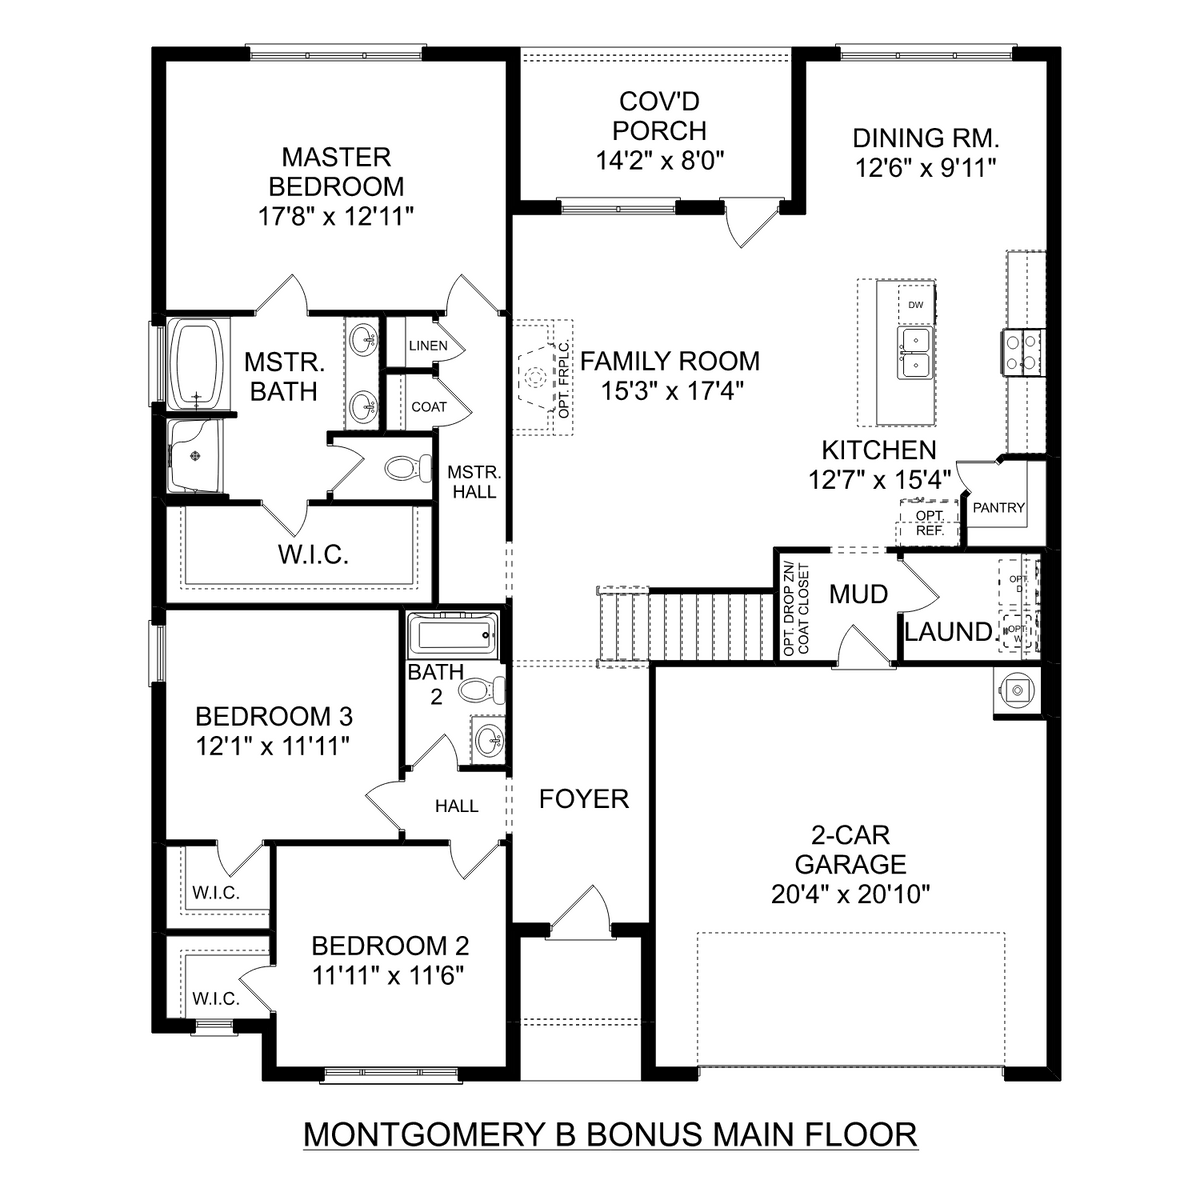 1 - The Montgomery B With Bonus buildable floor plan layout in Davidson Homes' Kendall Downs community.